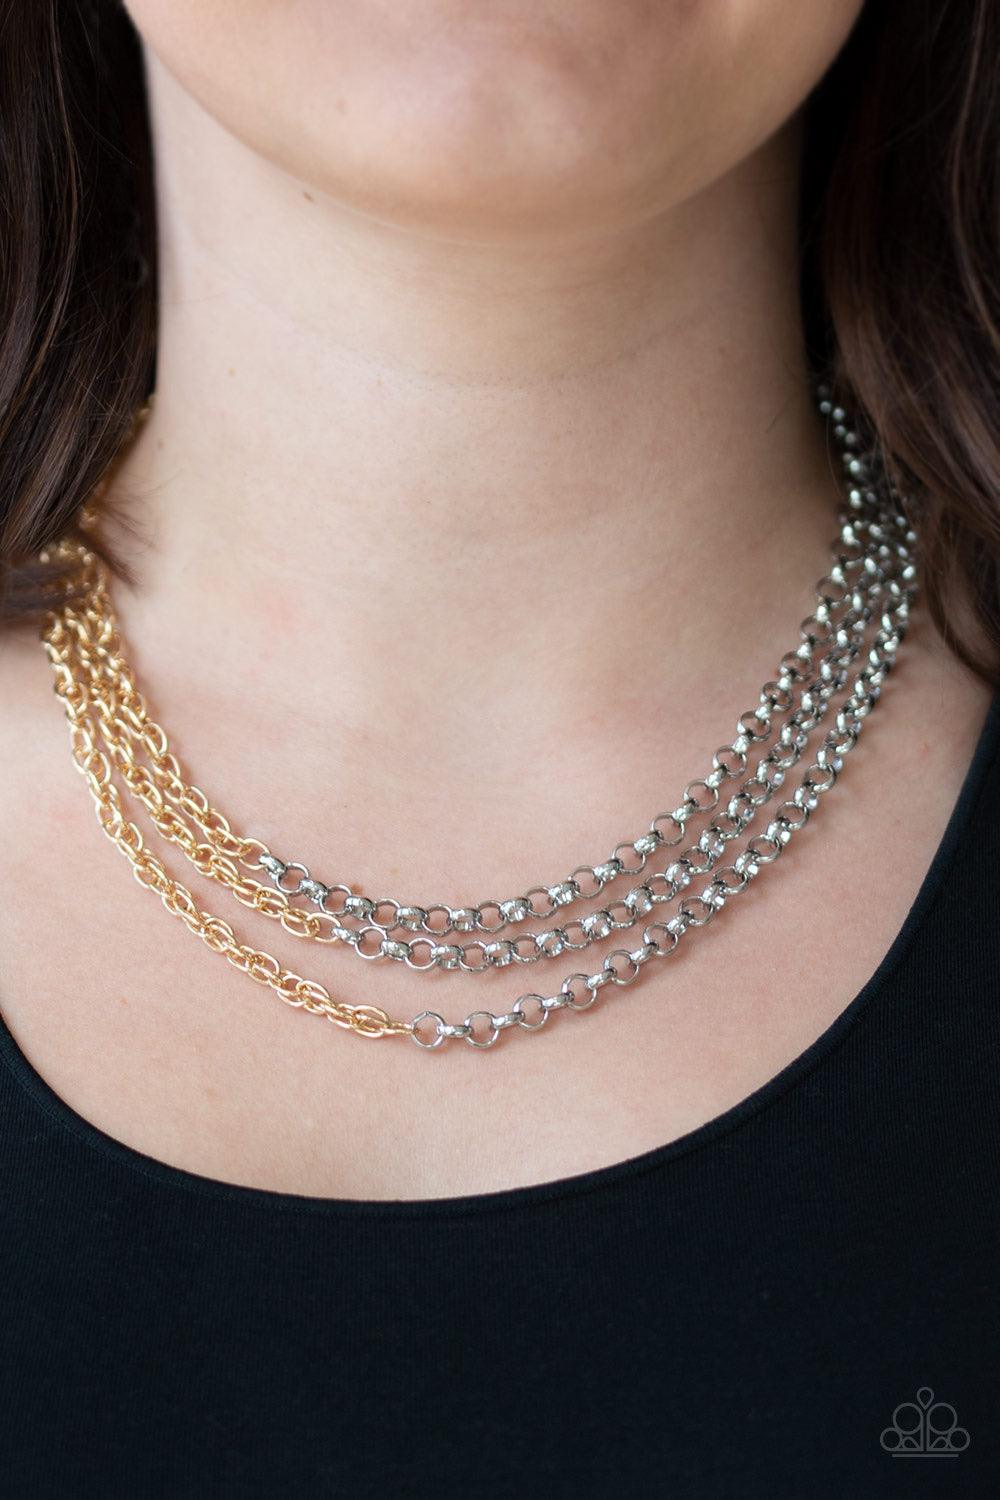 Paparazzi Accessories Metro Madness - Silver Strung between two silver fittings, glistening silver chains collide with shimmery gold chains below the collar, creating edgy mixed metallic layers. Features an adjustable clasp closure. Sold as one individual